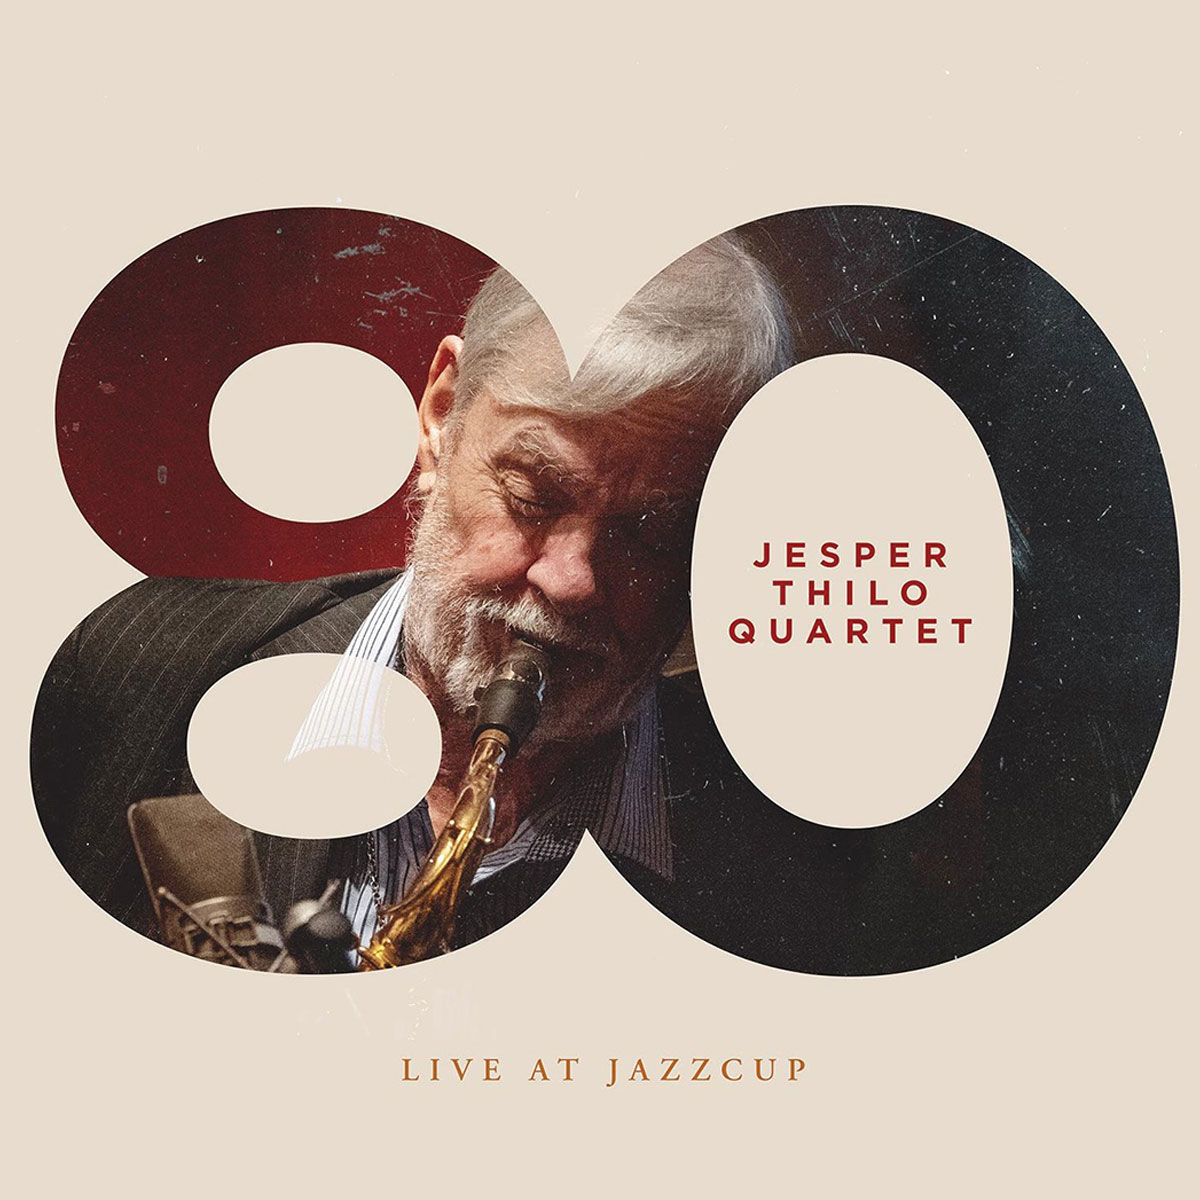 80 - Live at Jazzcup